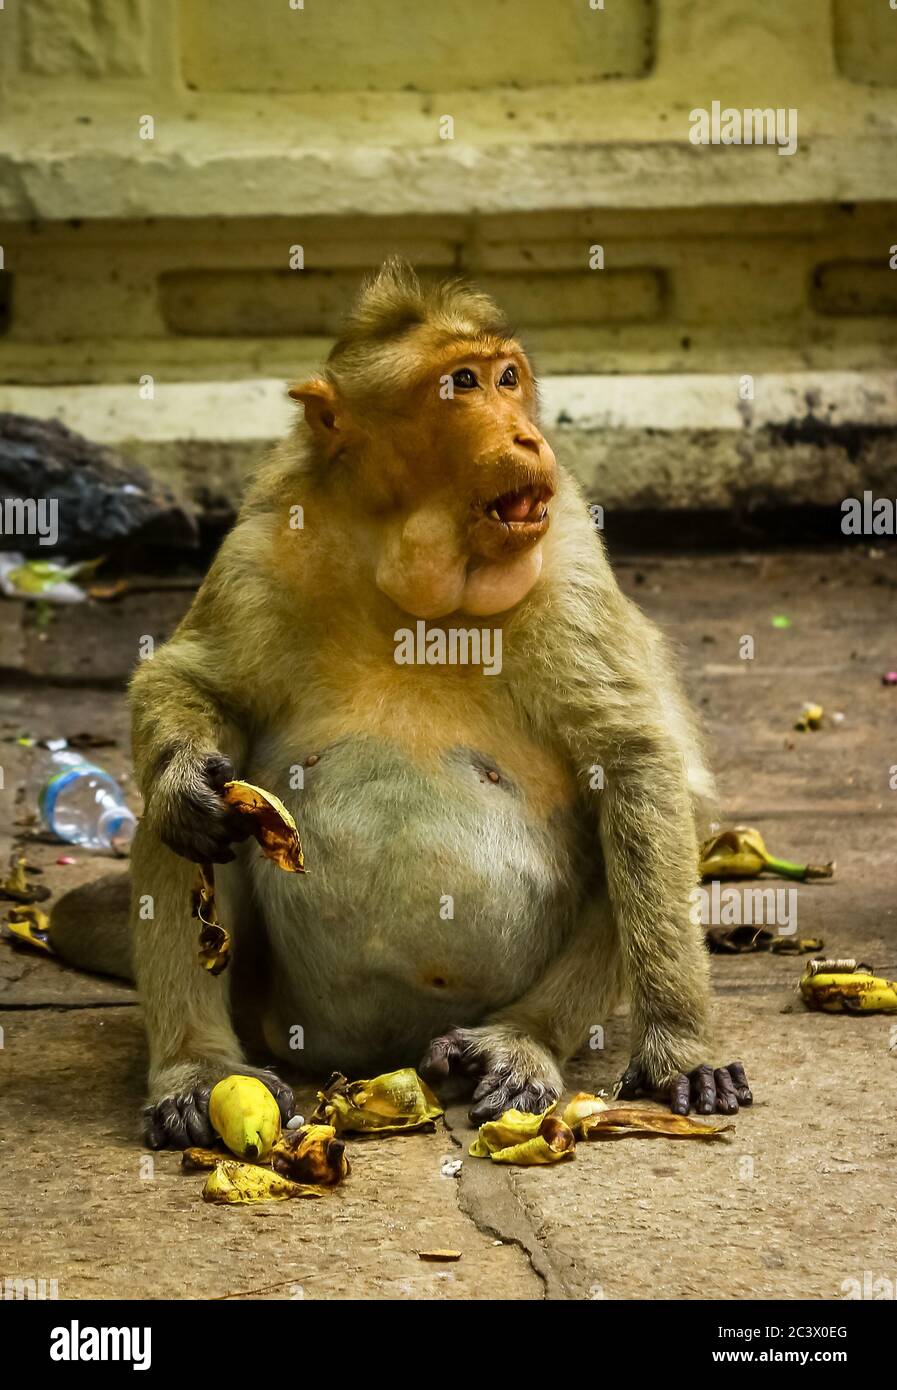 Big fat monkey king eating fruits with mount full loaded of banana and having bananas on its hand. Indian temple monkeys Stock Photo